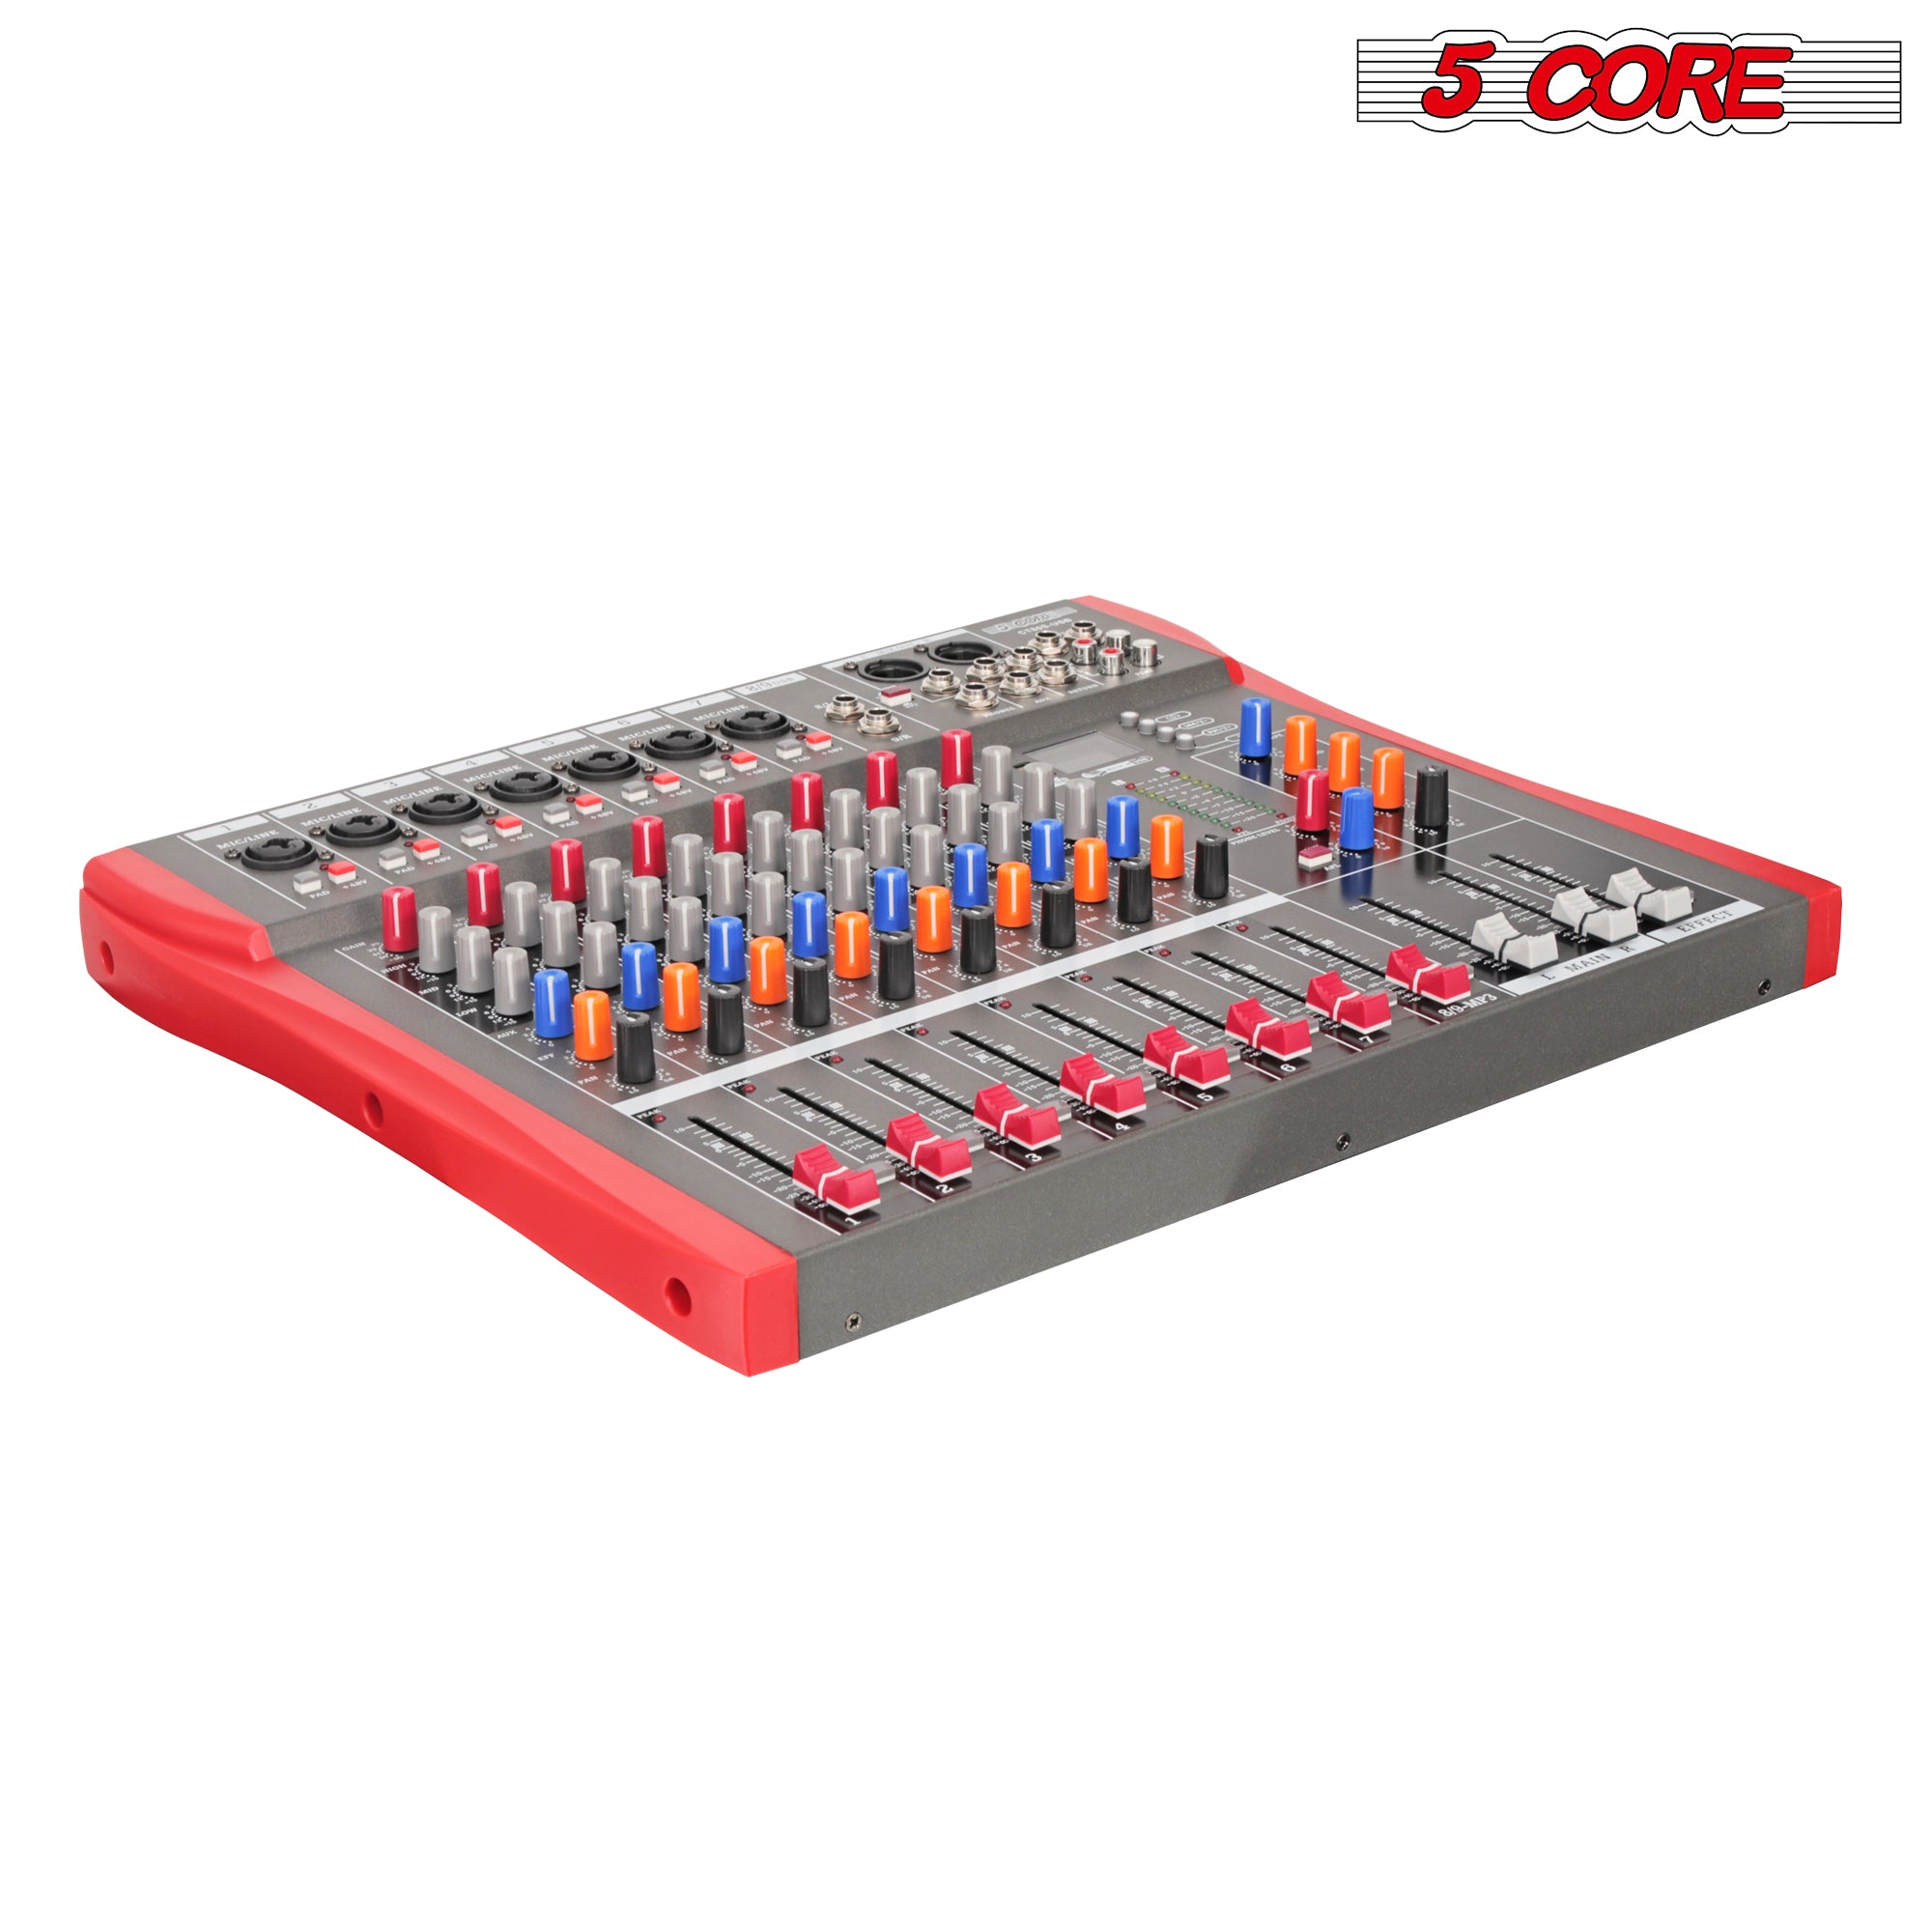 8 Channel USB Audio Mixer with Digital Effects and Bluetooth Connectivity.